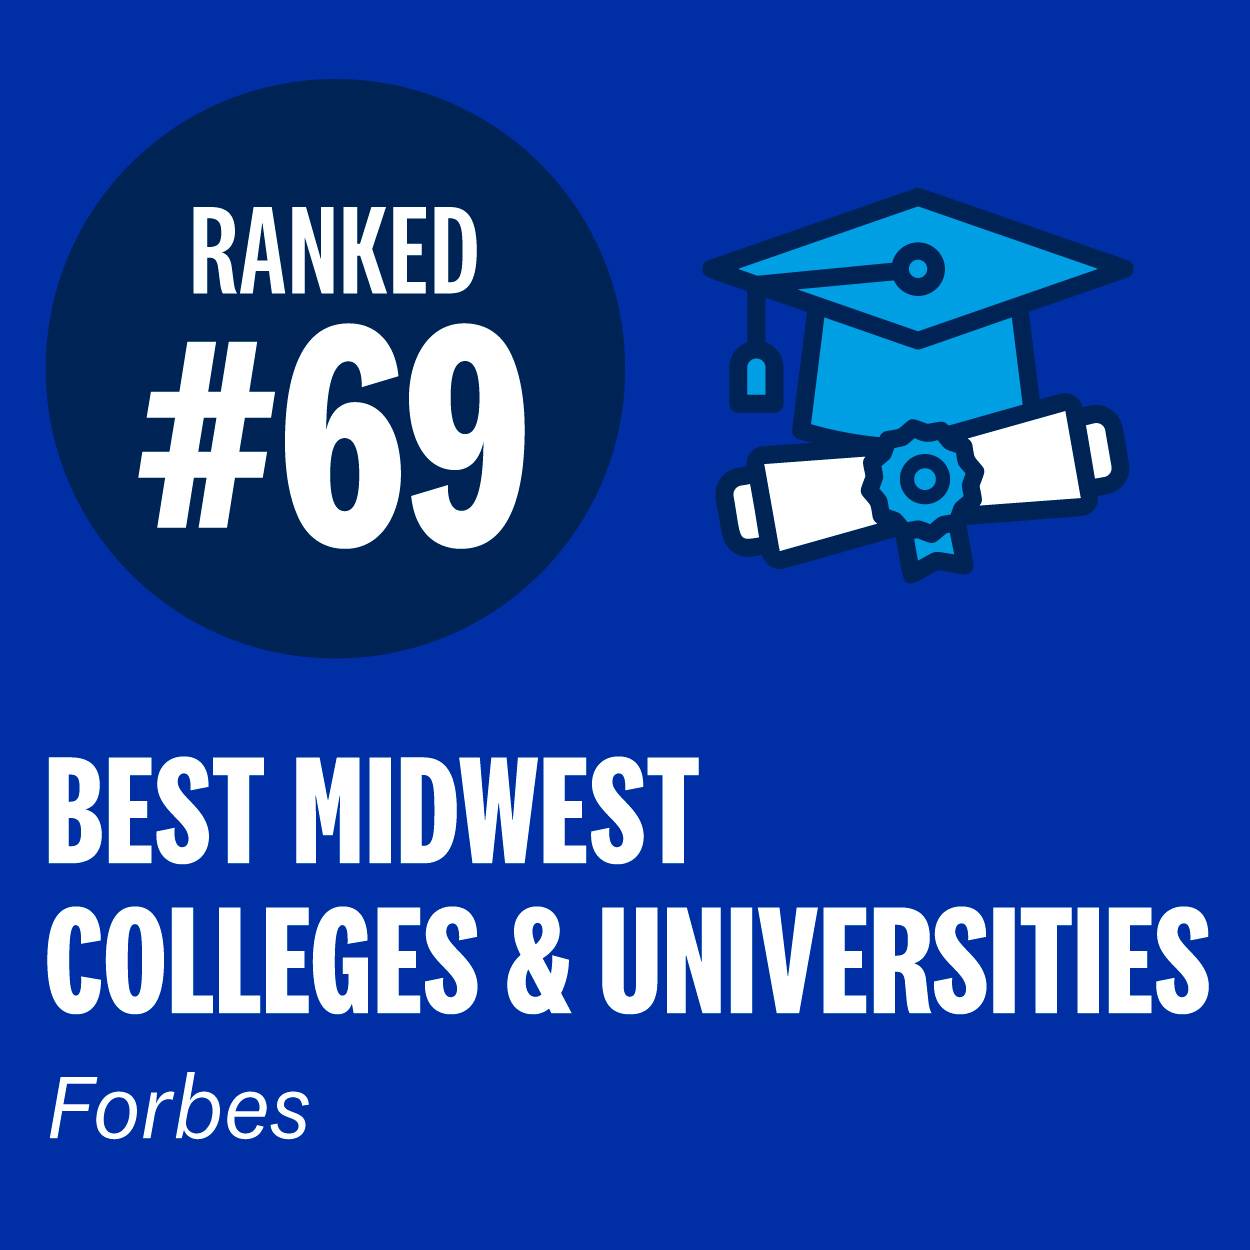 Ranked #69 in Best Midwest Colleges & Universities by Forbes